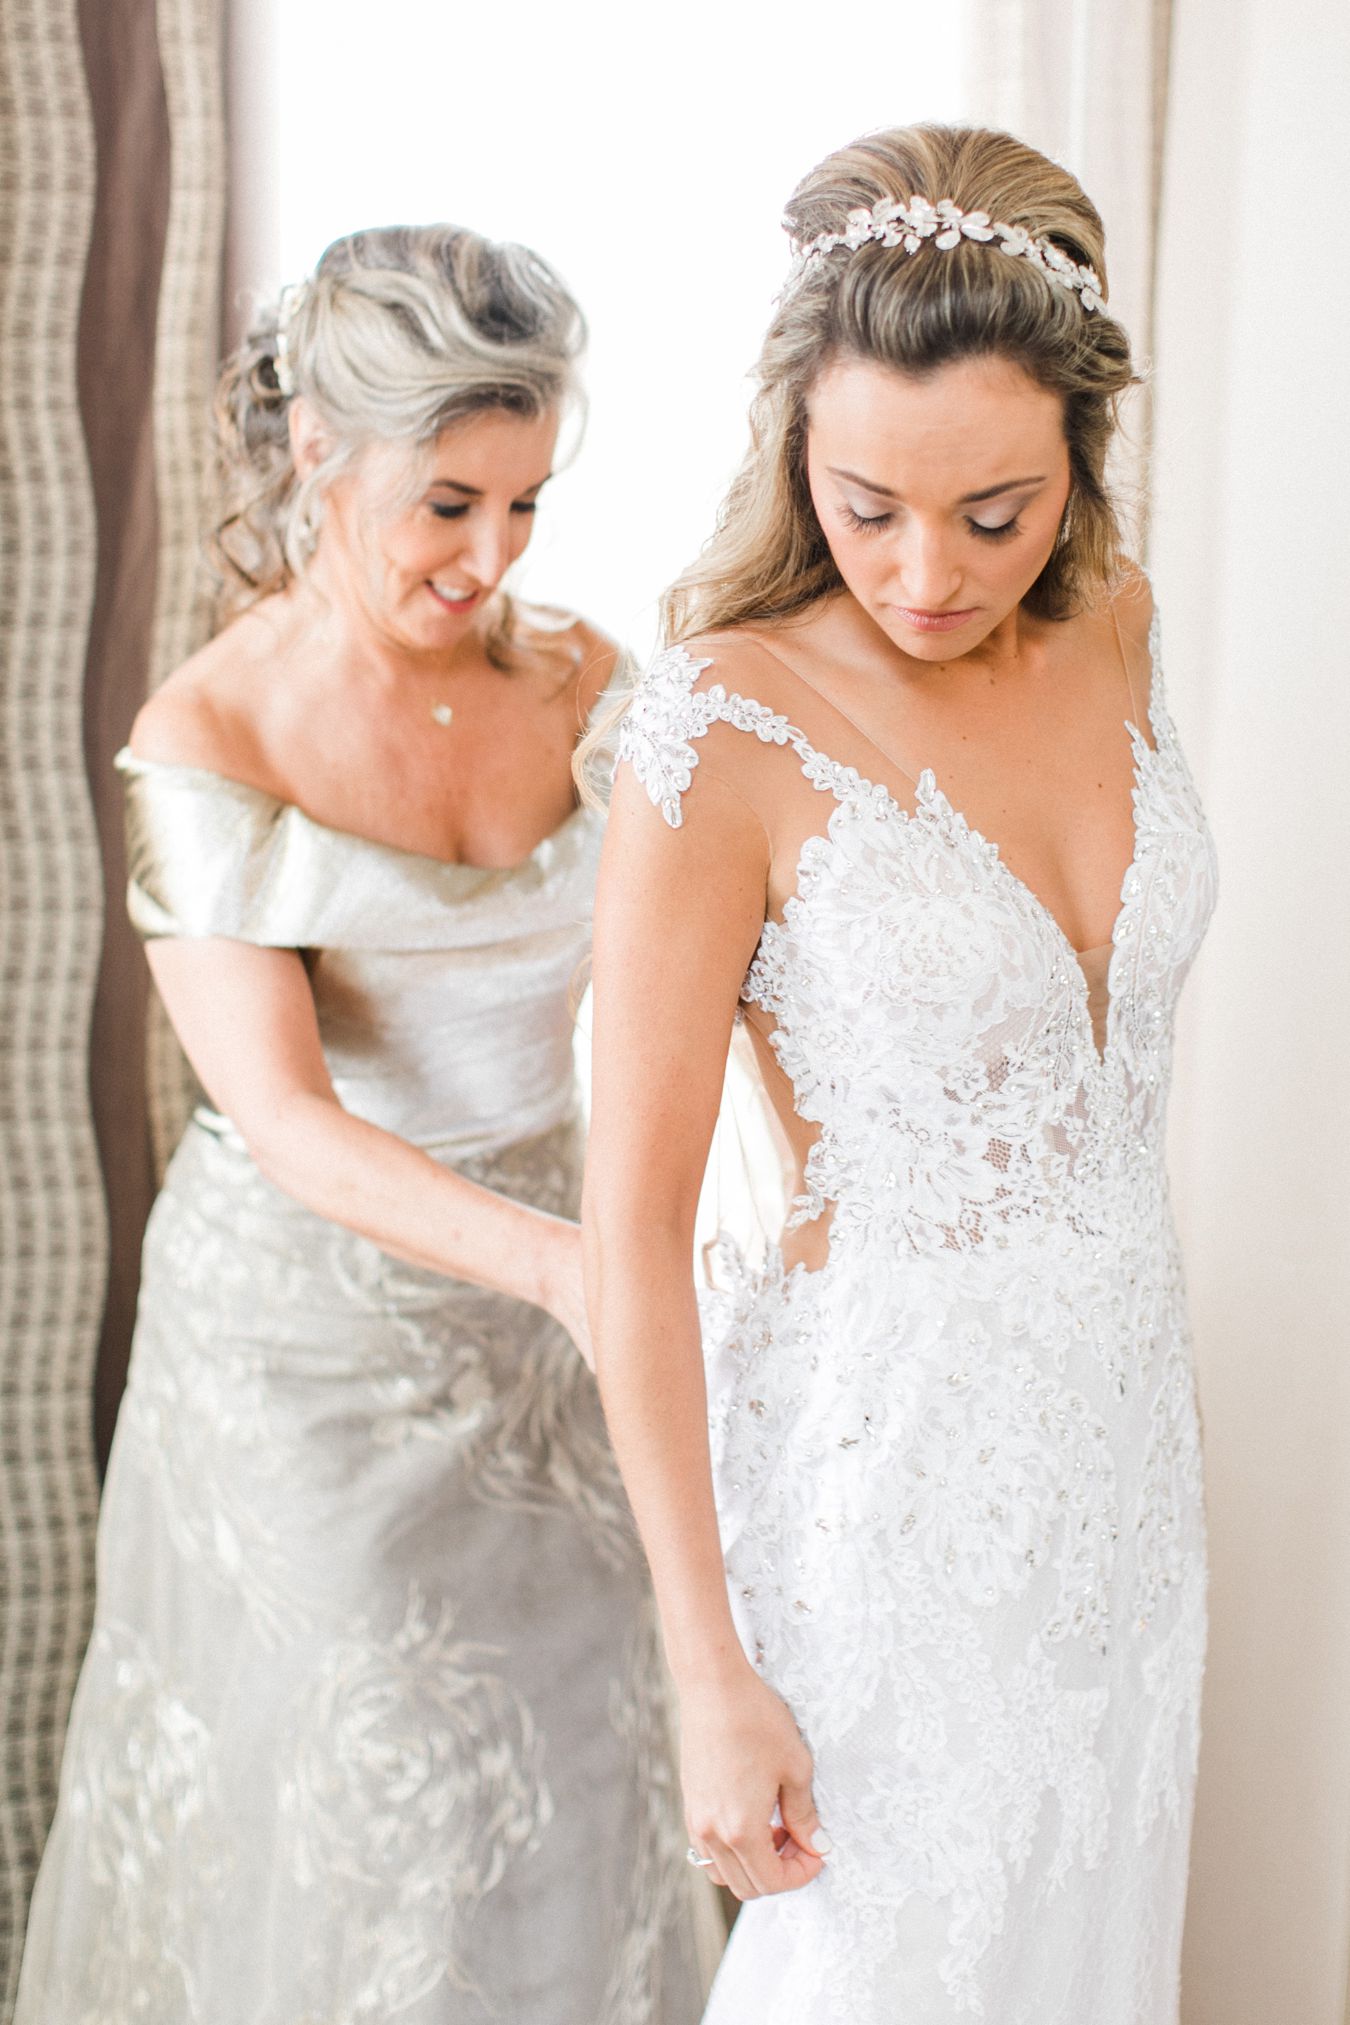 Northern Michigan Bride Details | Cory Weber Photography